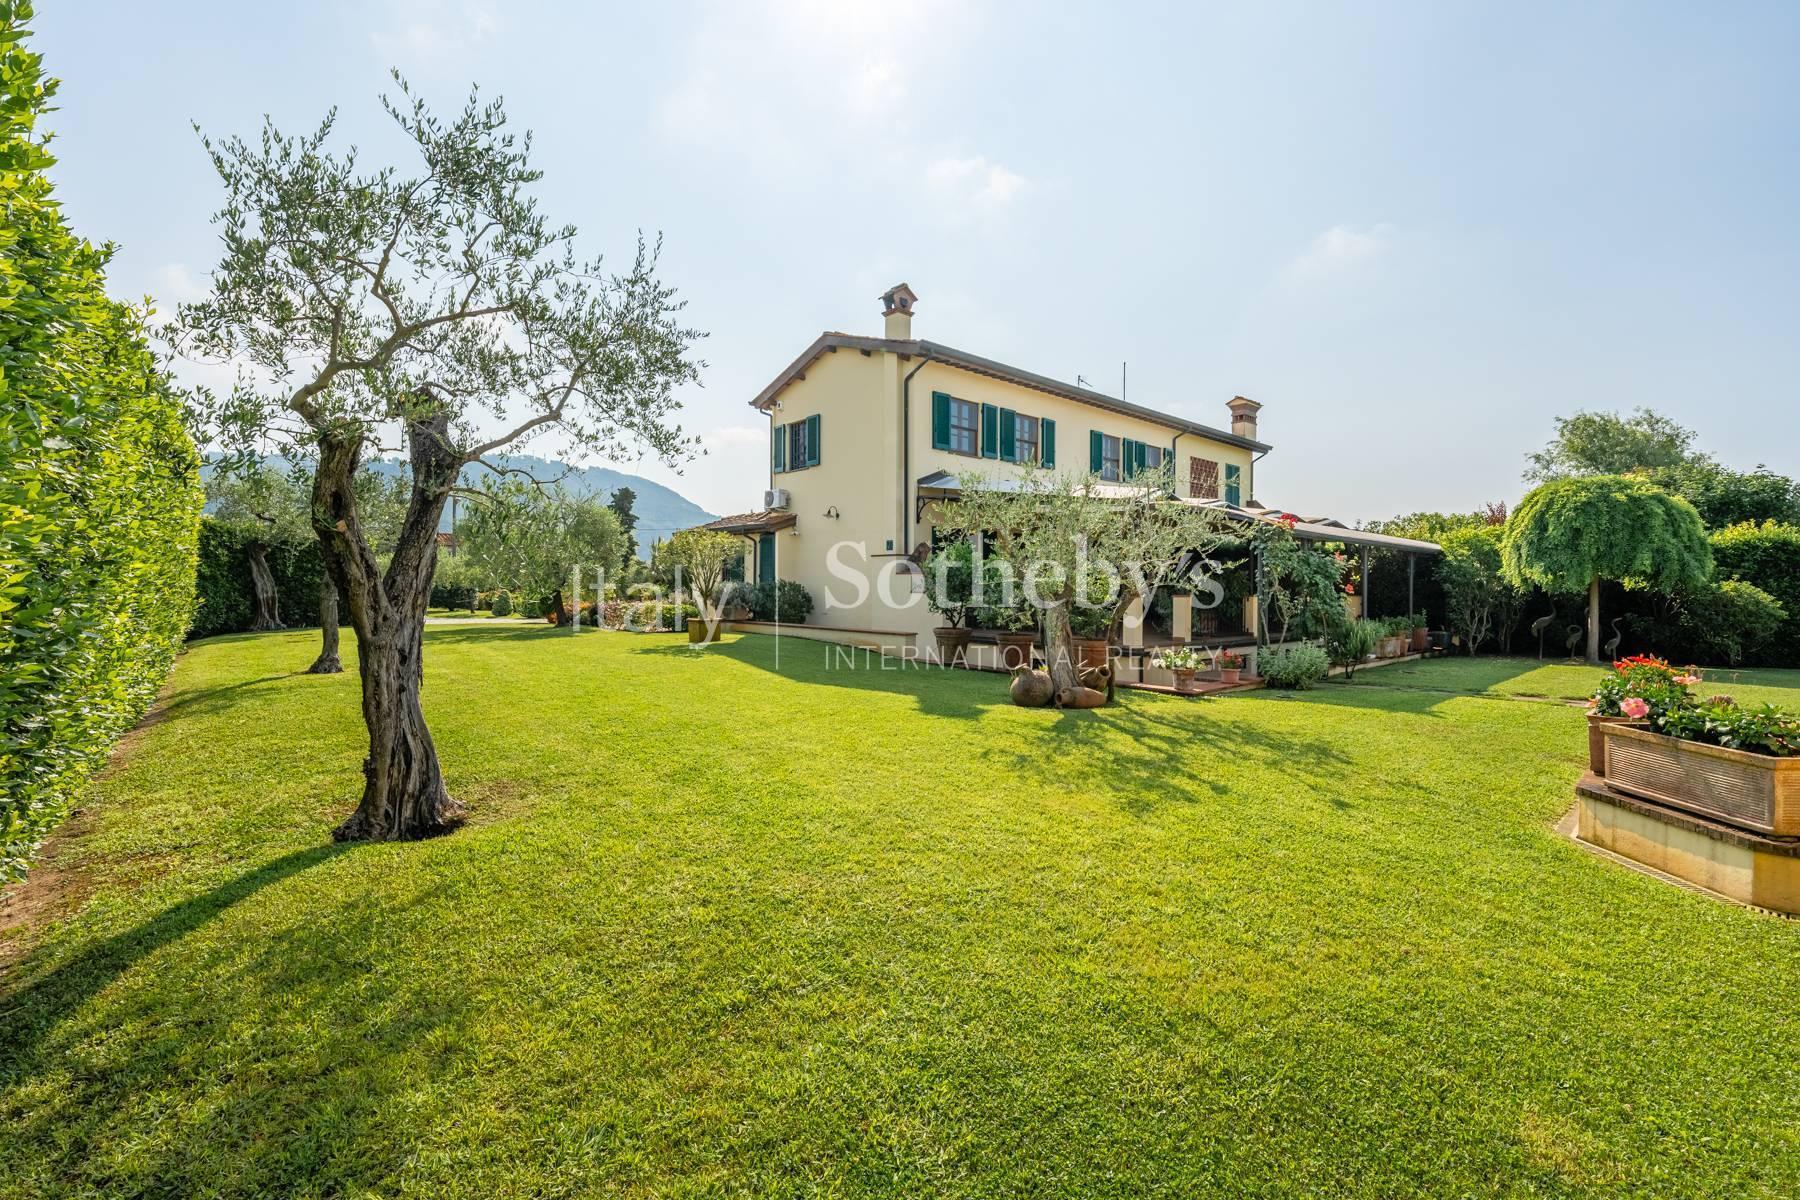 Villa in the countryside of Lucca a stone's throw from the sea - 5